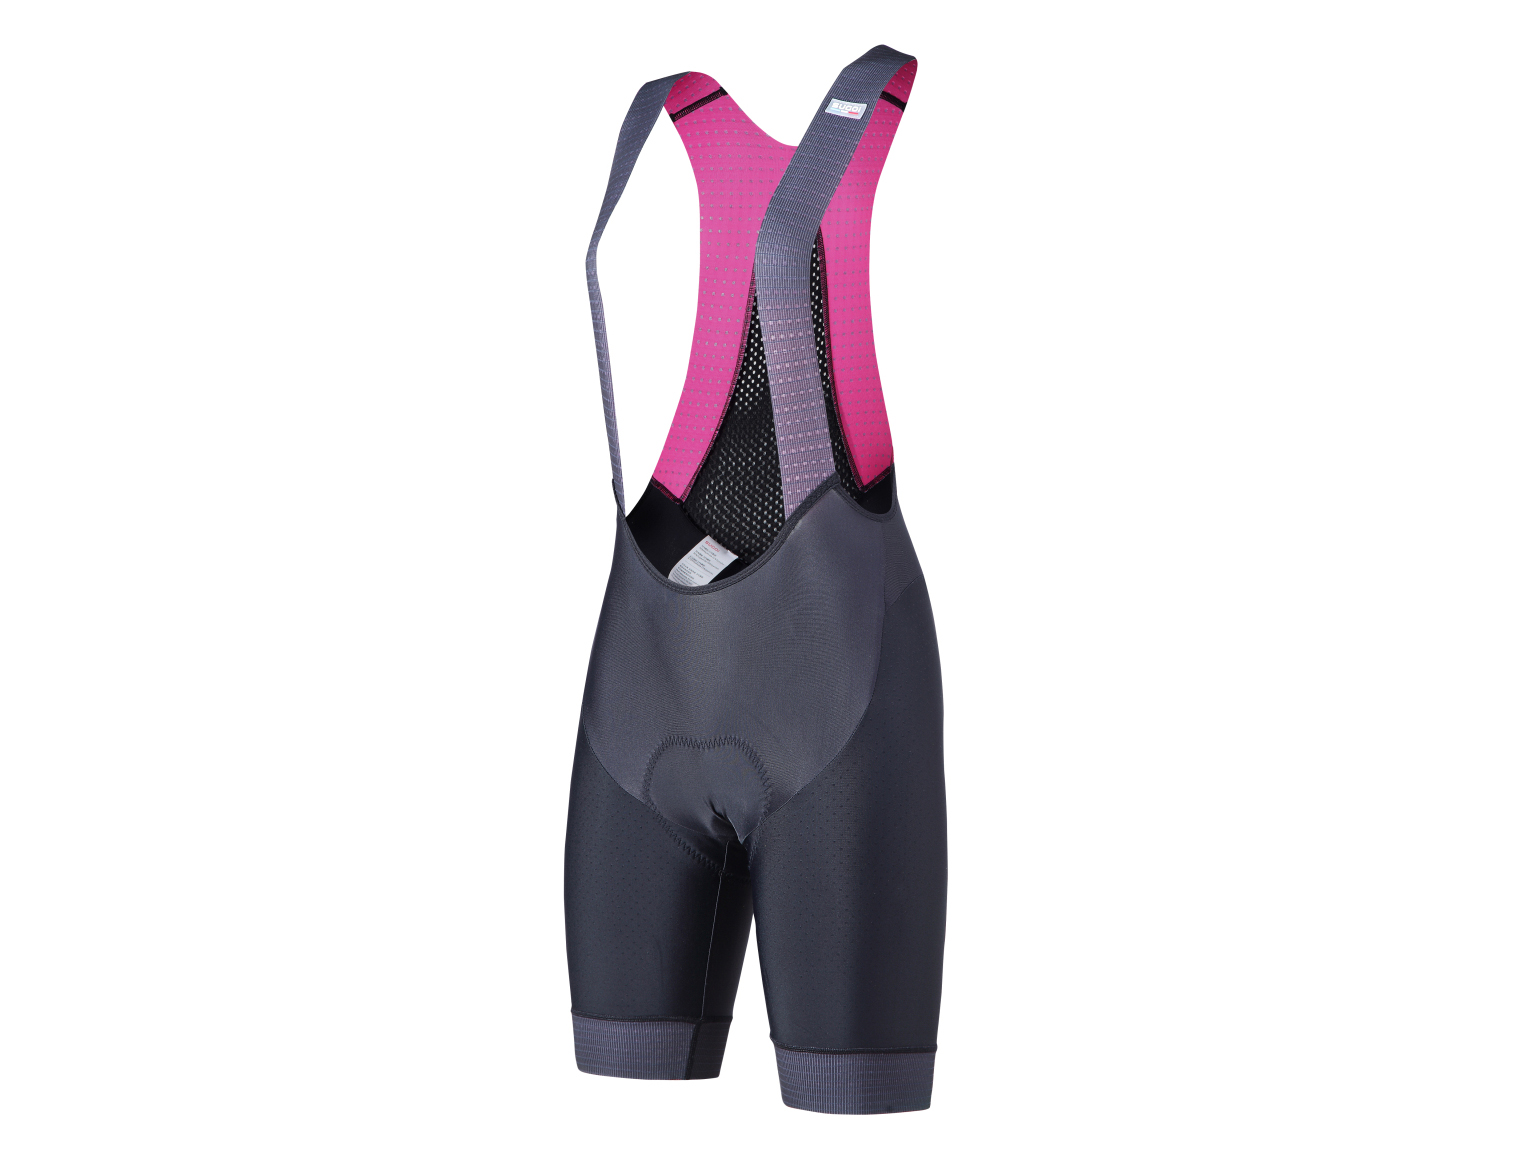 Lady’s knitted bicycle Bib short with pad